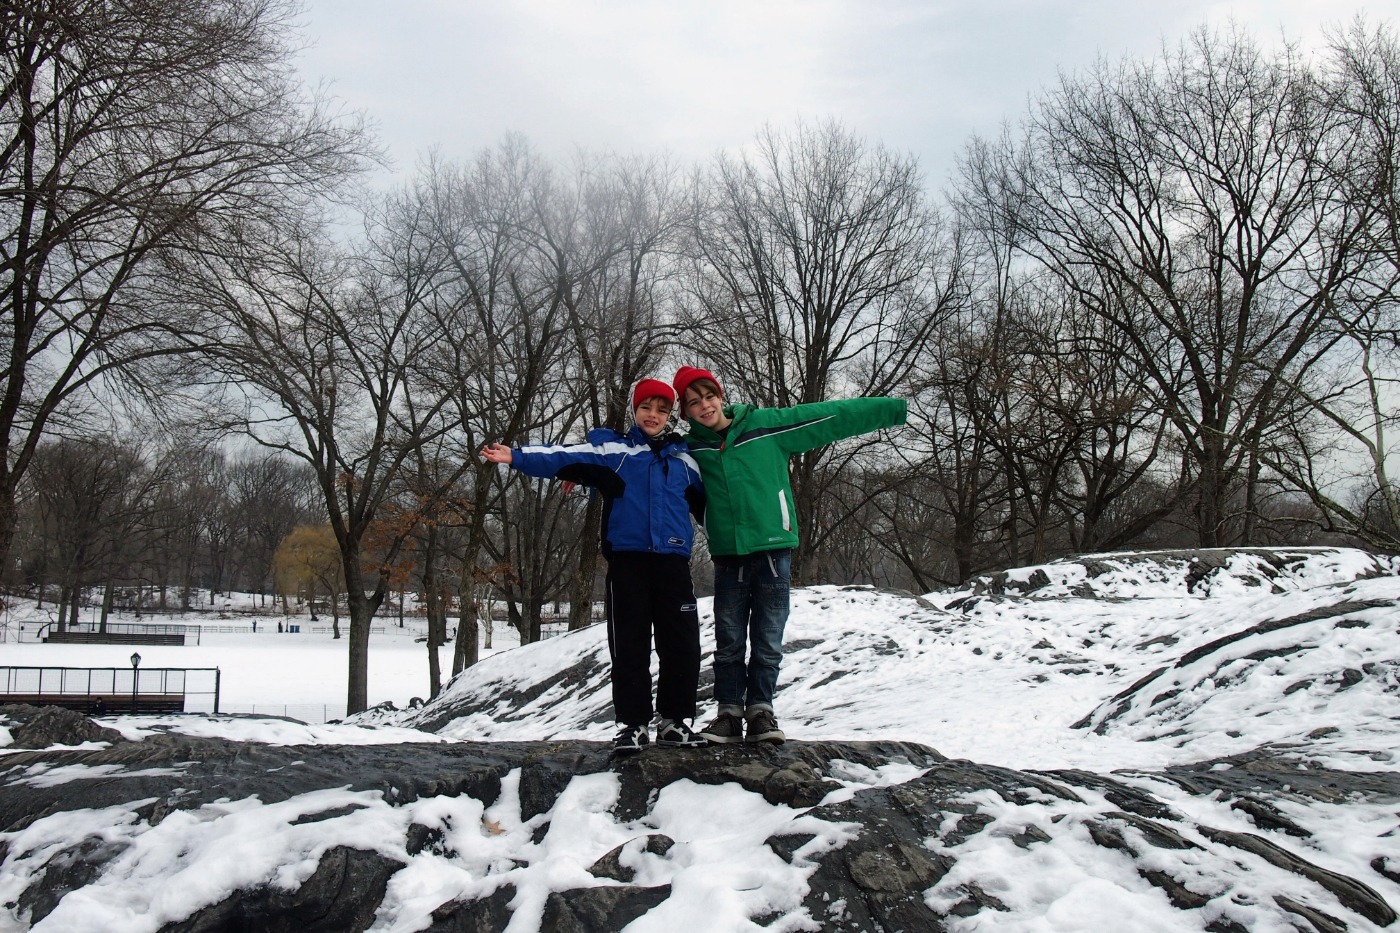 kids in new york central park in winter dressed for the cold